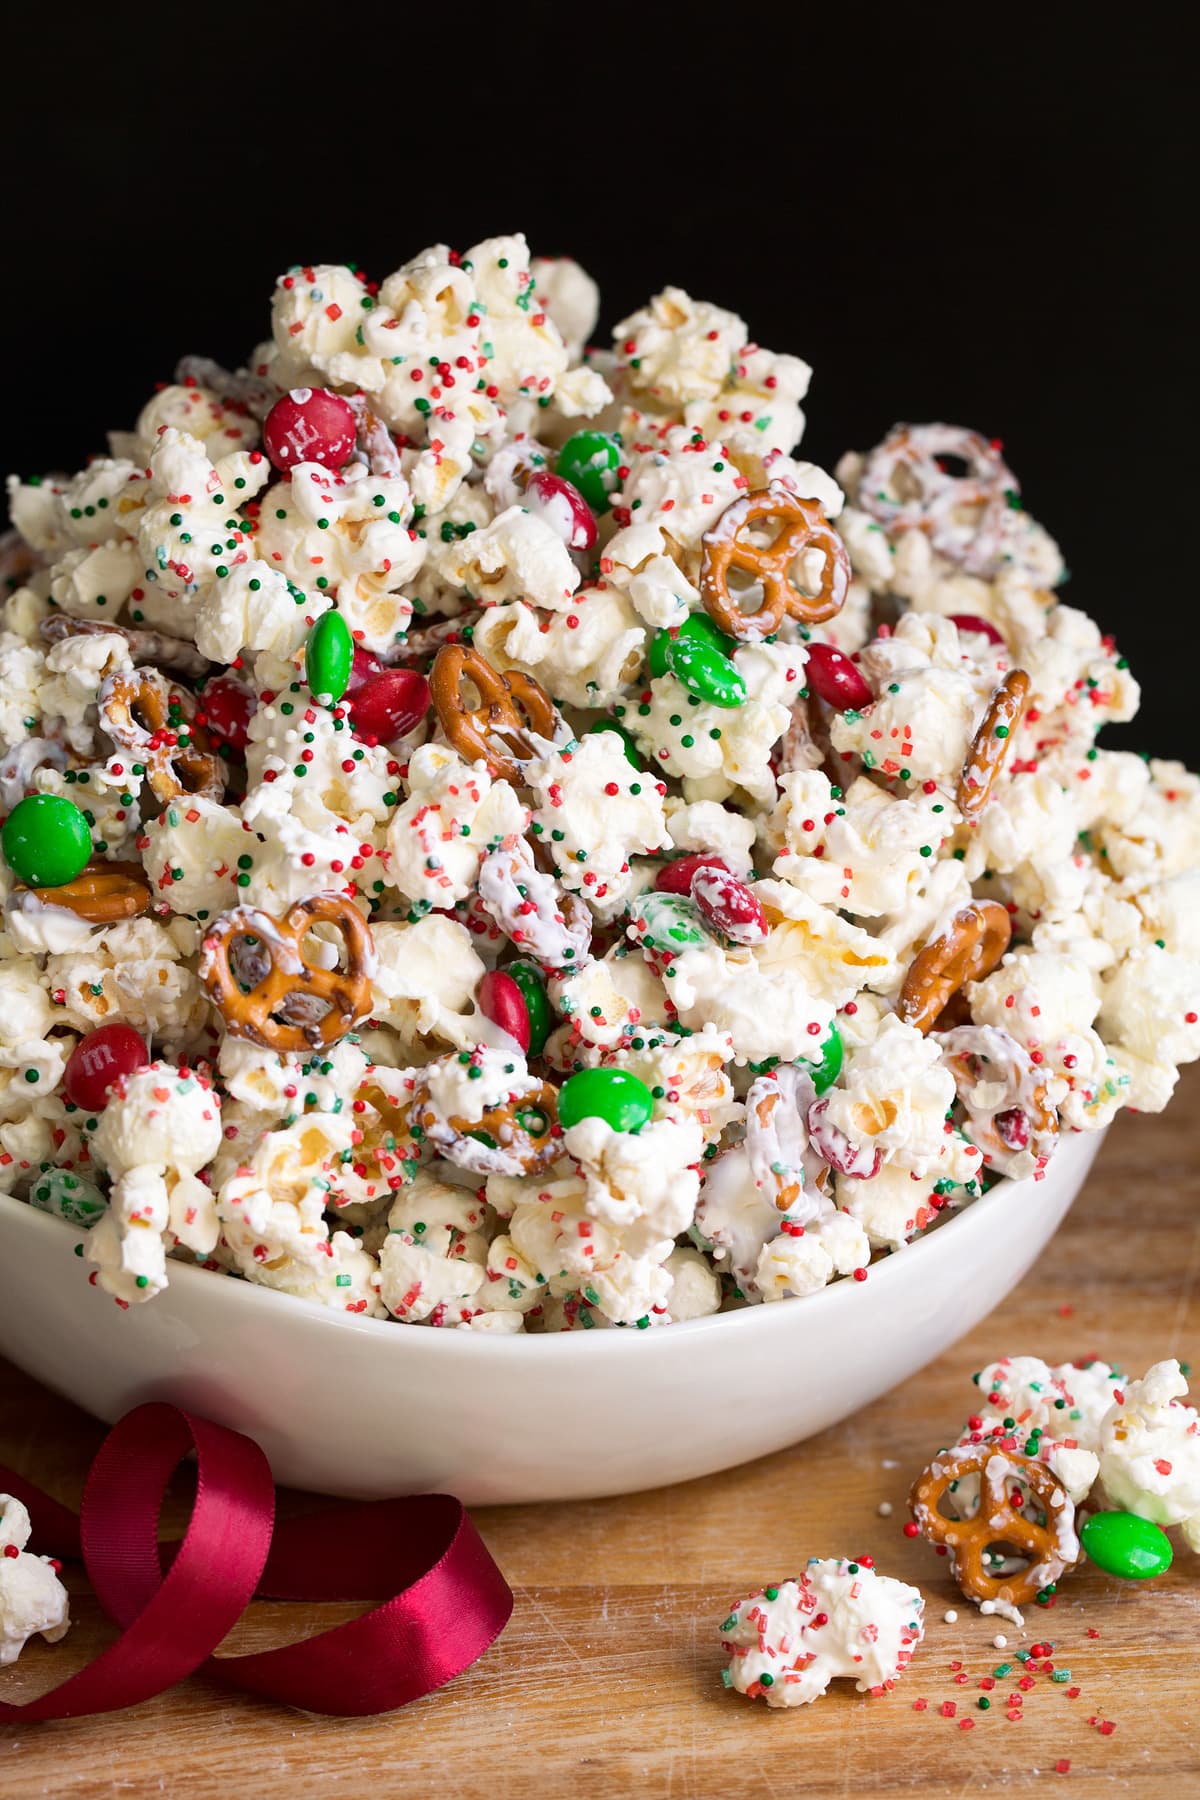 Christmas Crunch popcorn with pretzels, white chocolate coating, m and m's and sprinkles.